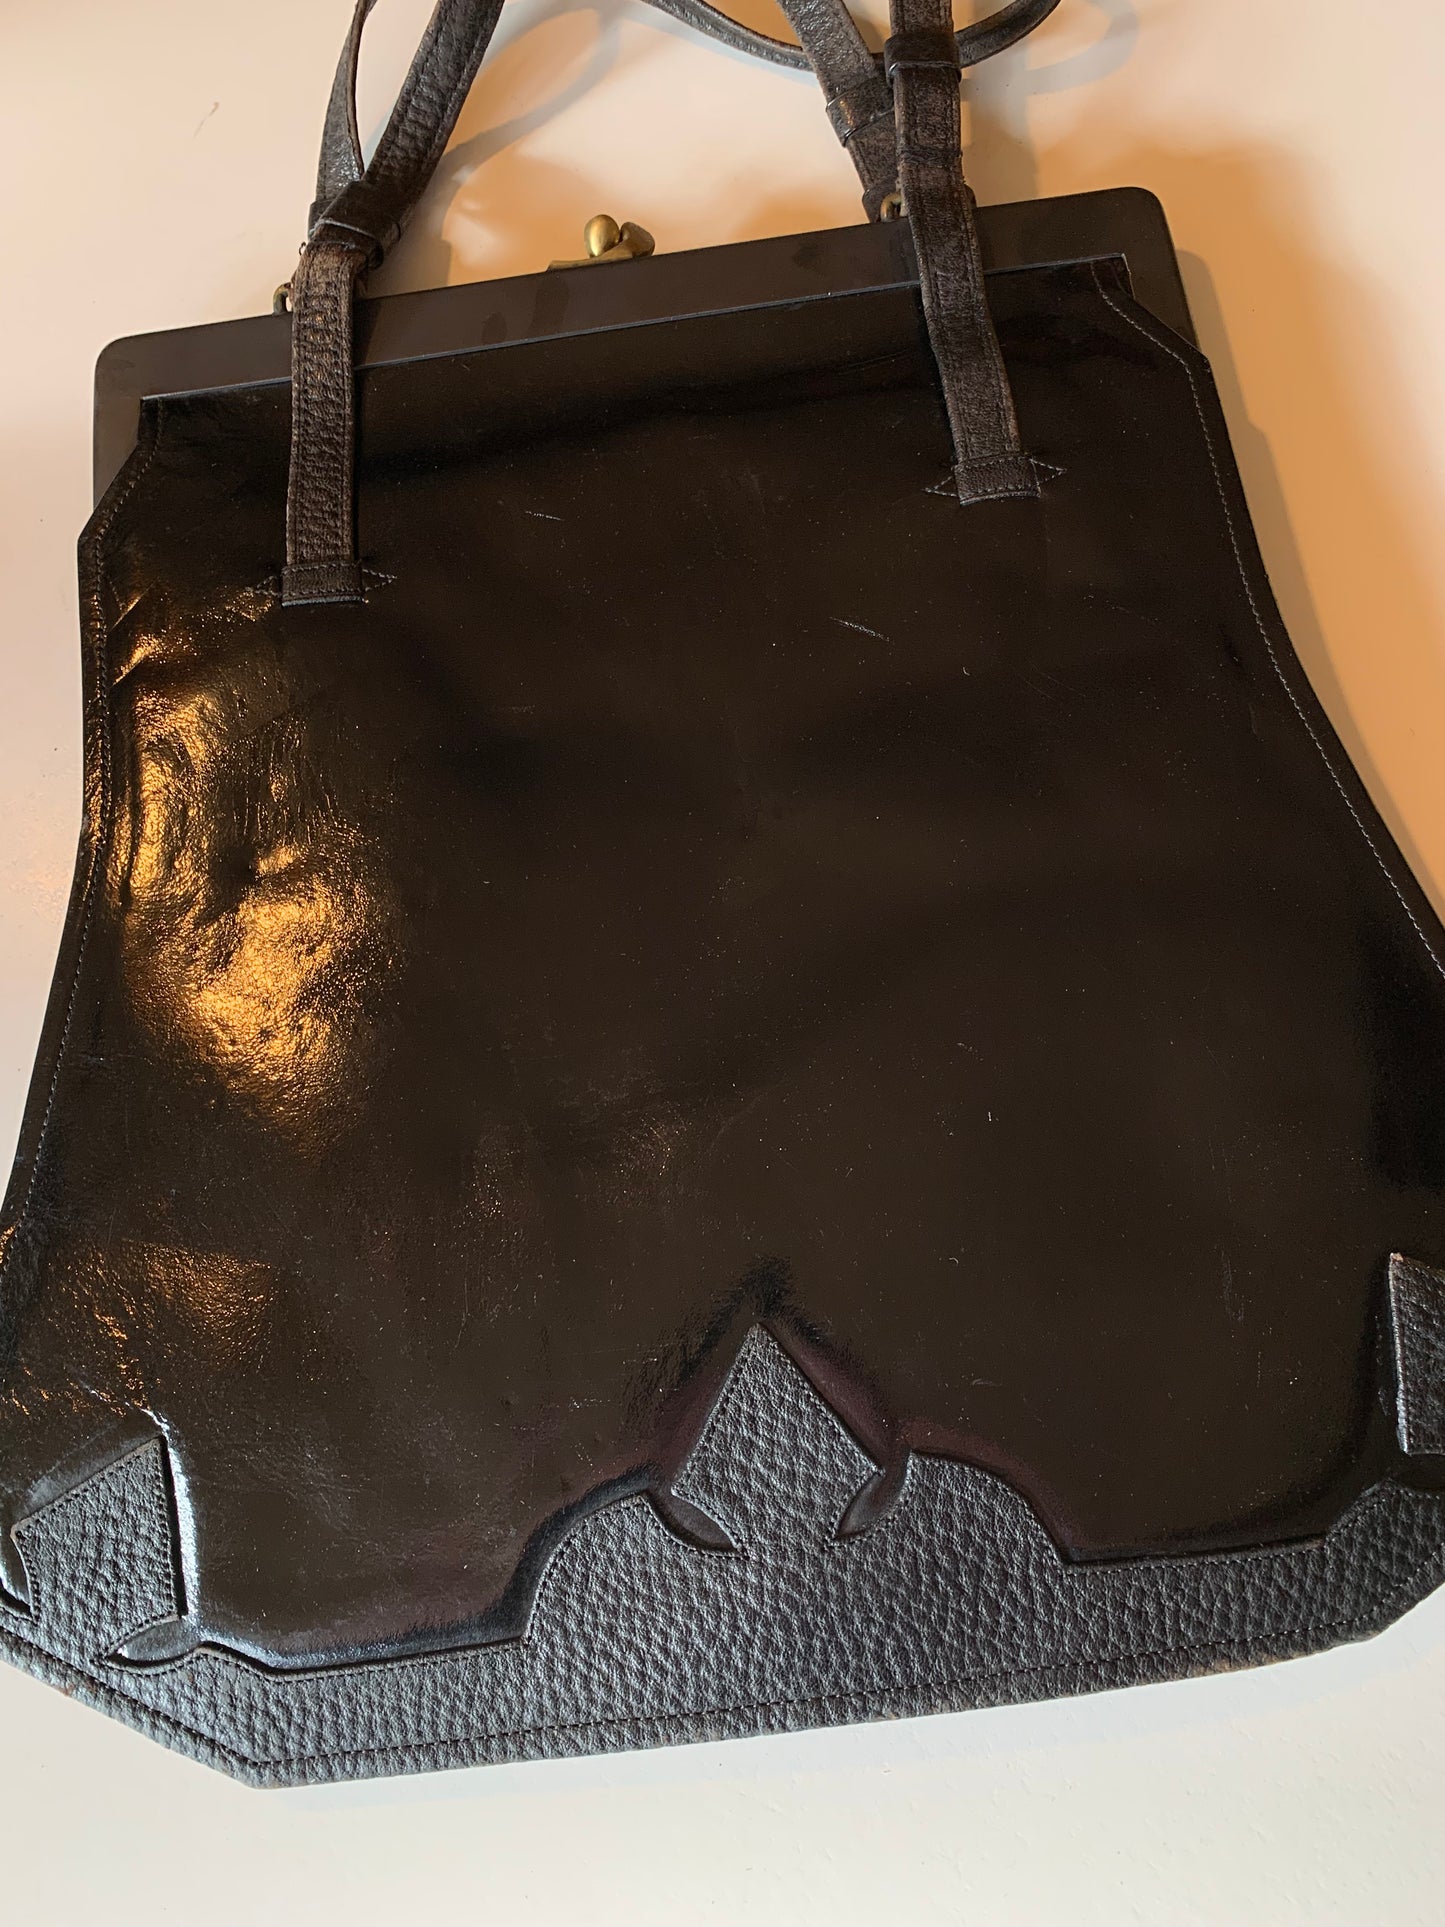 Large Black Patent Leather Handbag with Textured Leather Floral Design circa 1910s